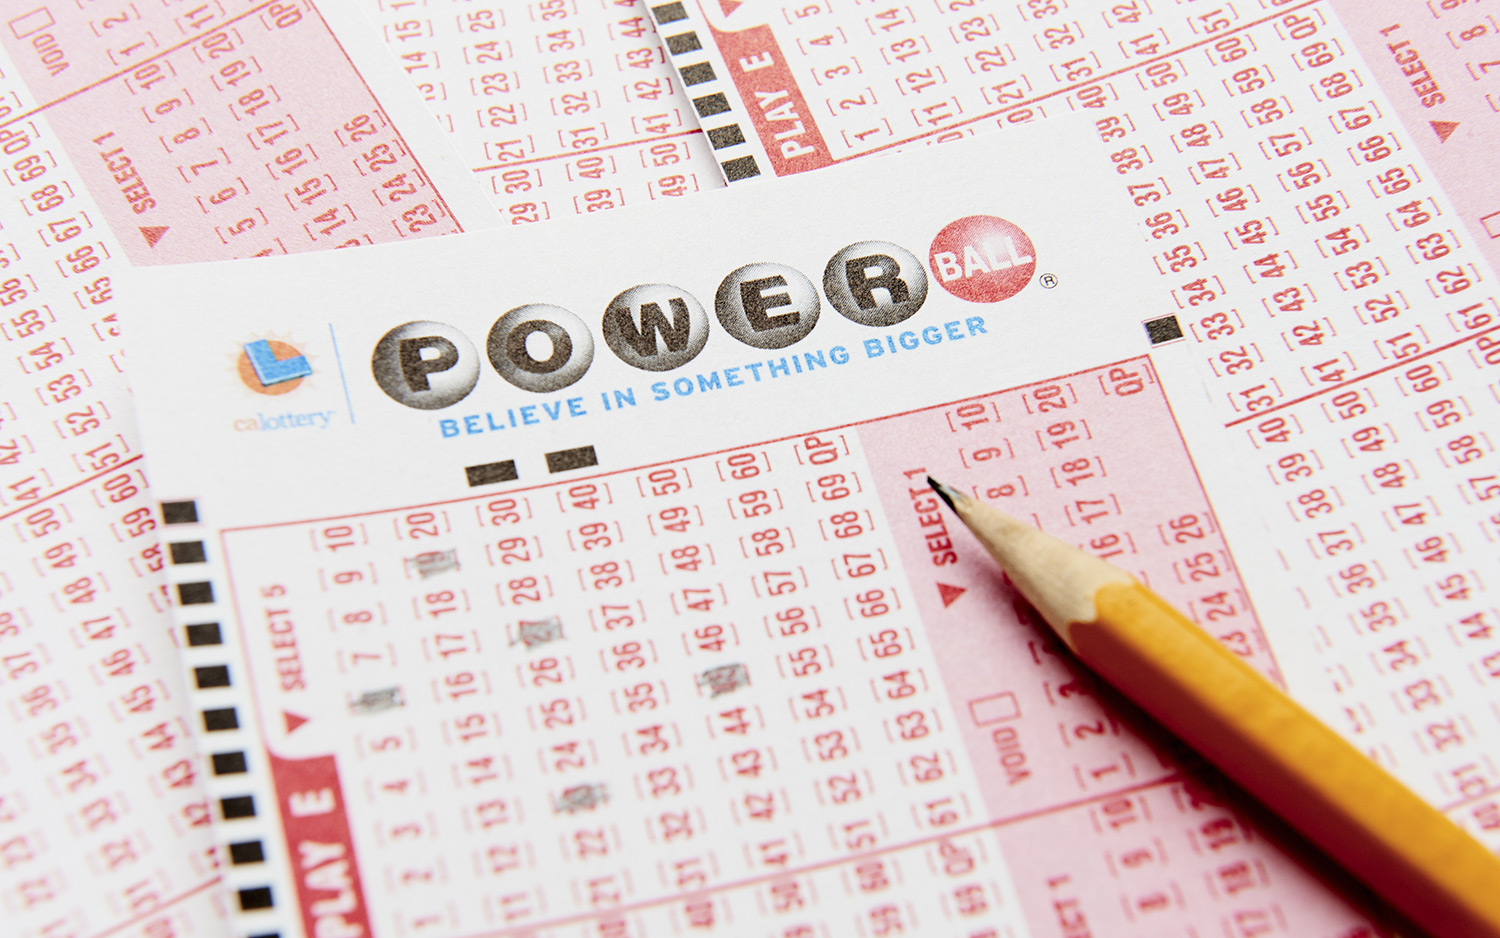 Powerball jackpot is $1.6 billion. If you win, here's the tax bill